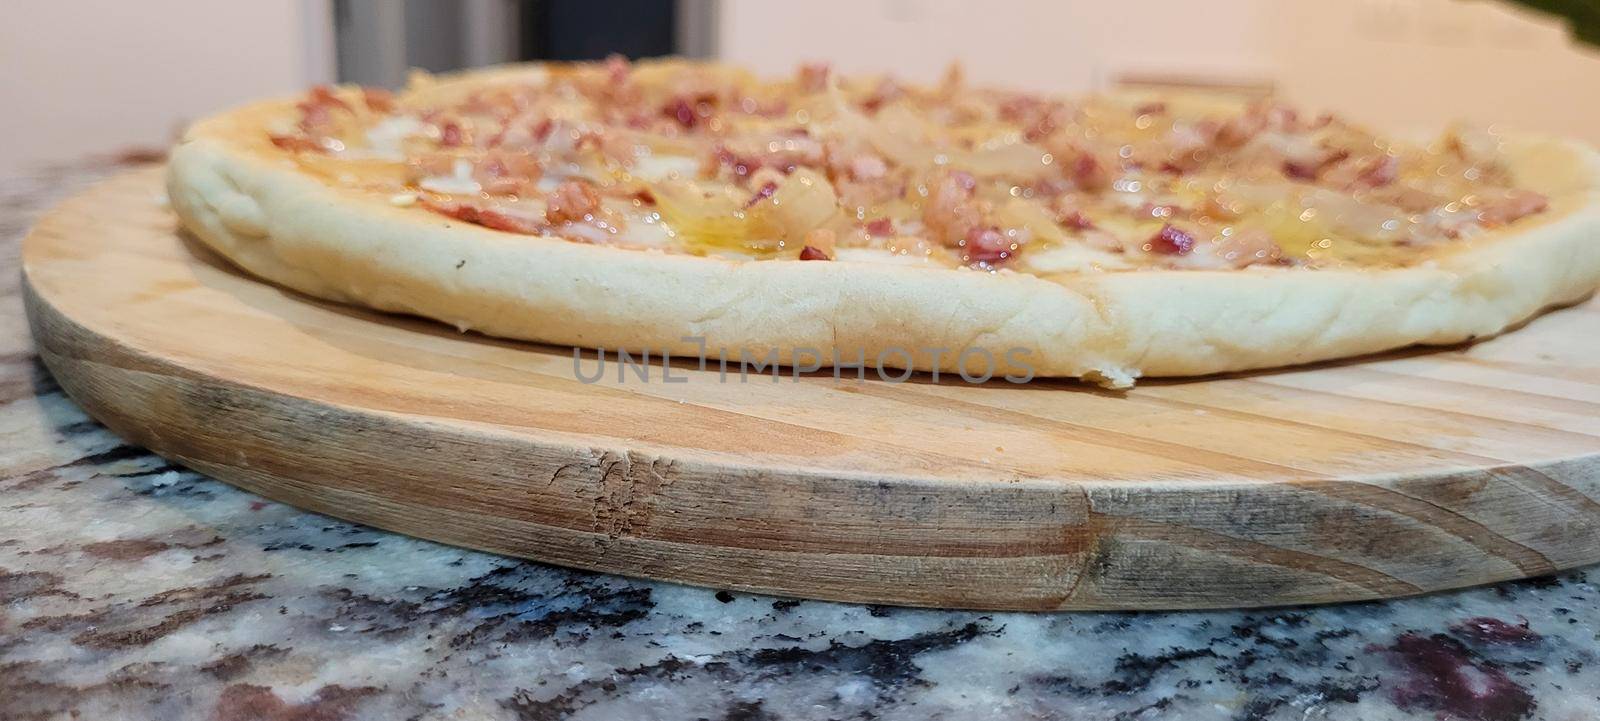 homemade homemade pizza with pasta made with a family recipe and stuffed with bacon, onion, cheese and sauce, great for a family weekend